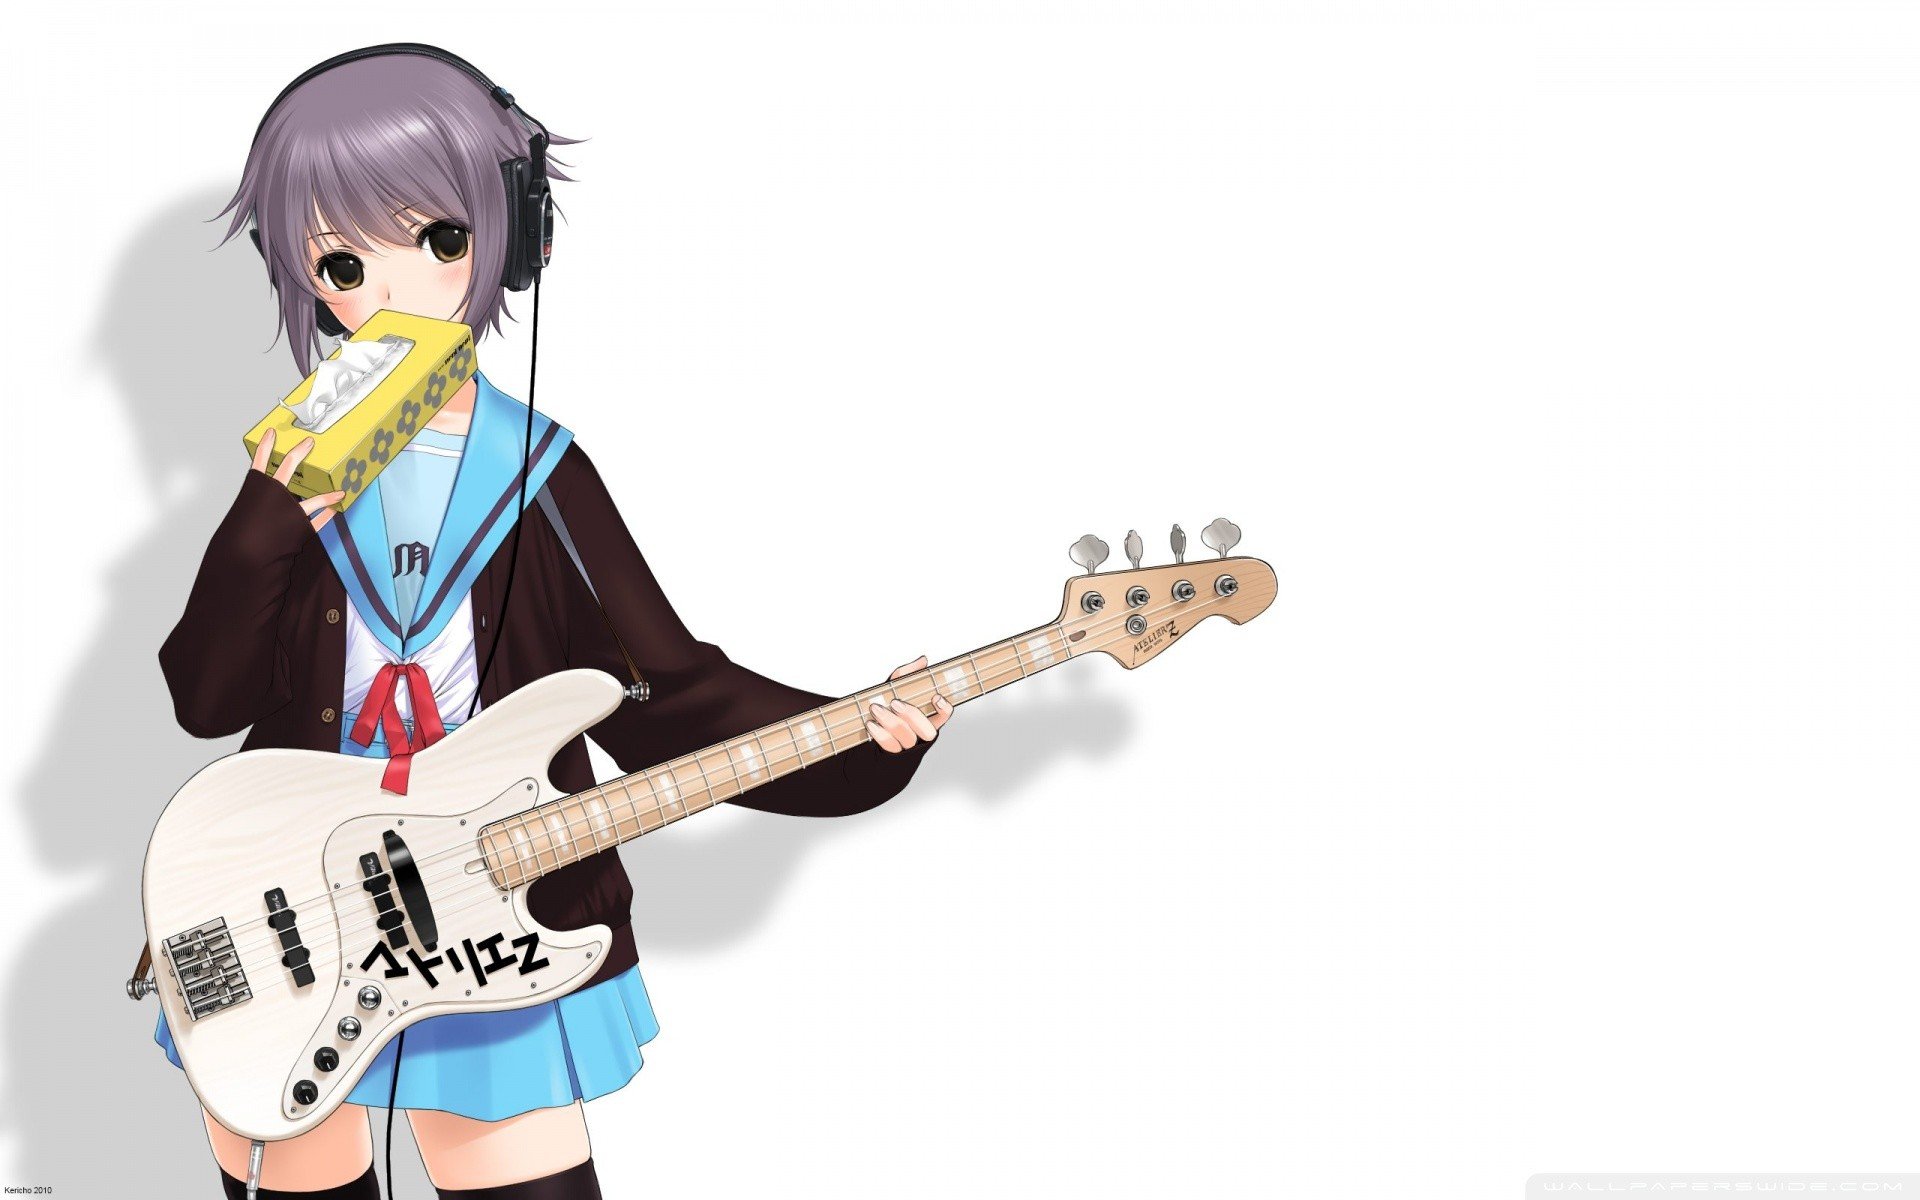 Anime Girl With Guitar And Headphones - HD Wallpaper 